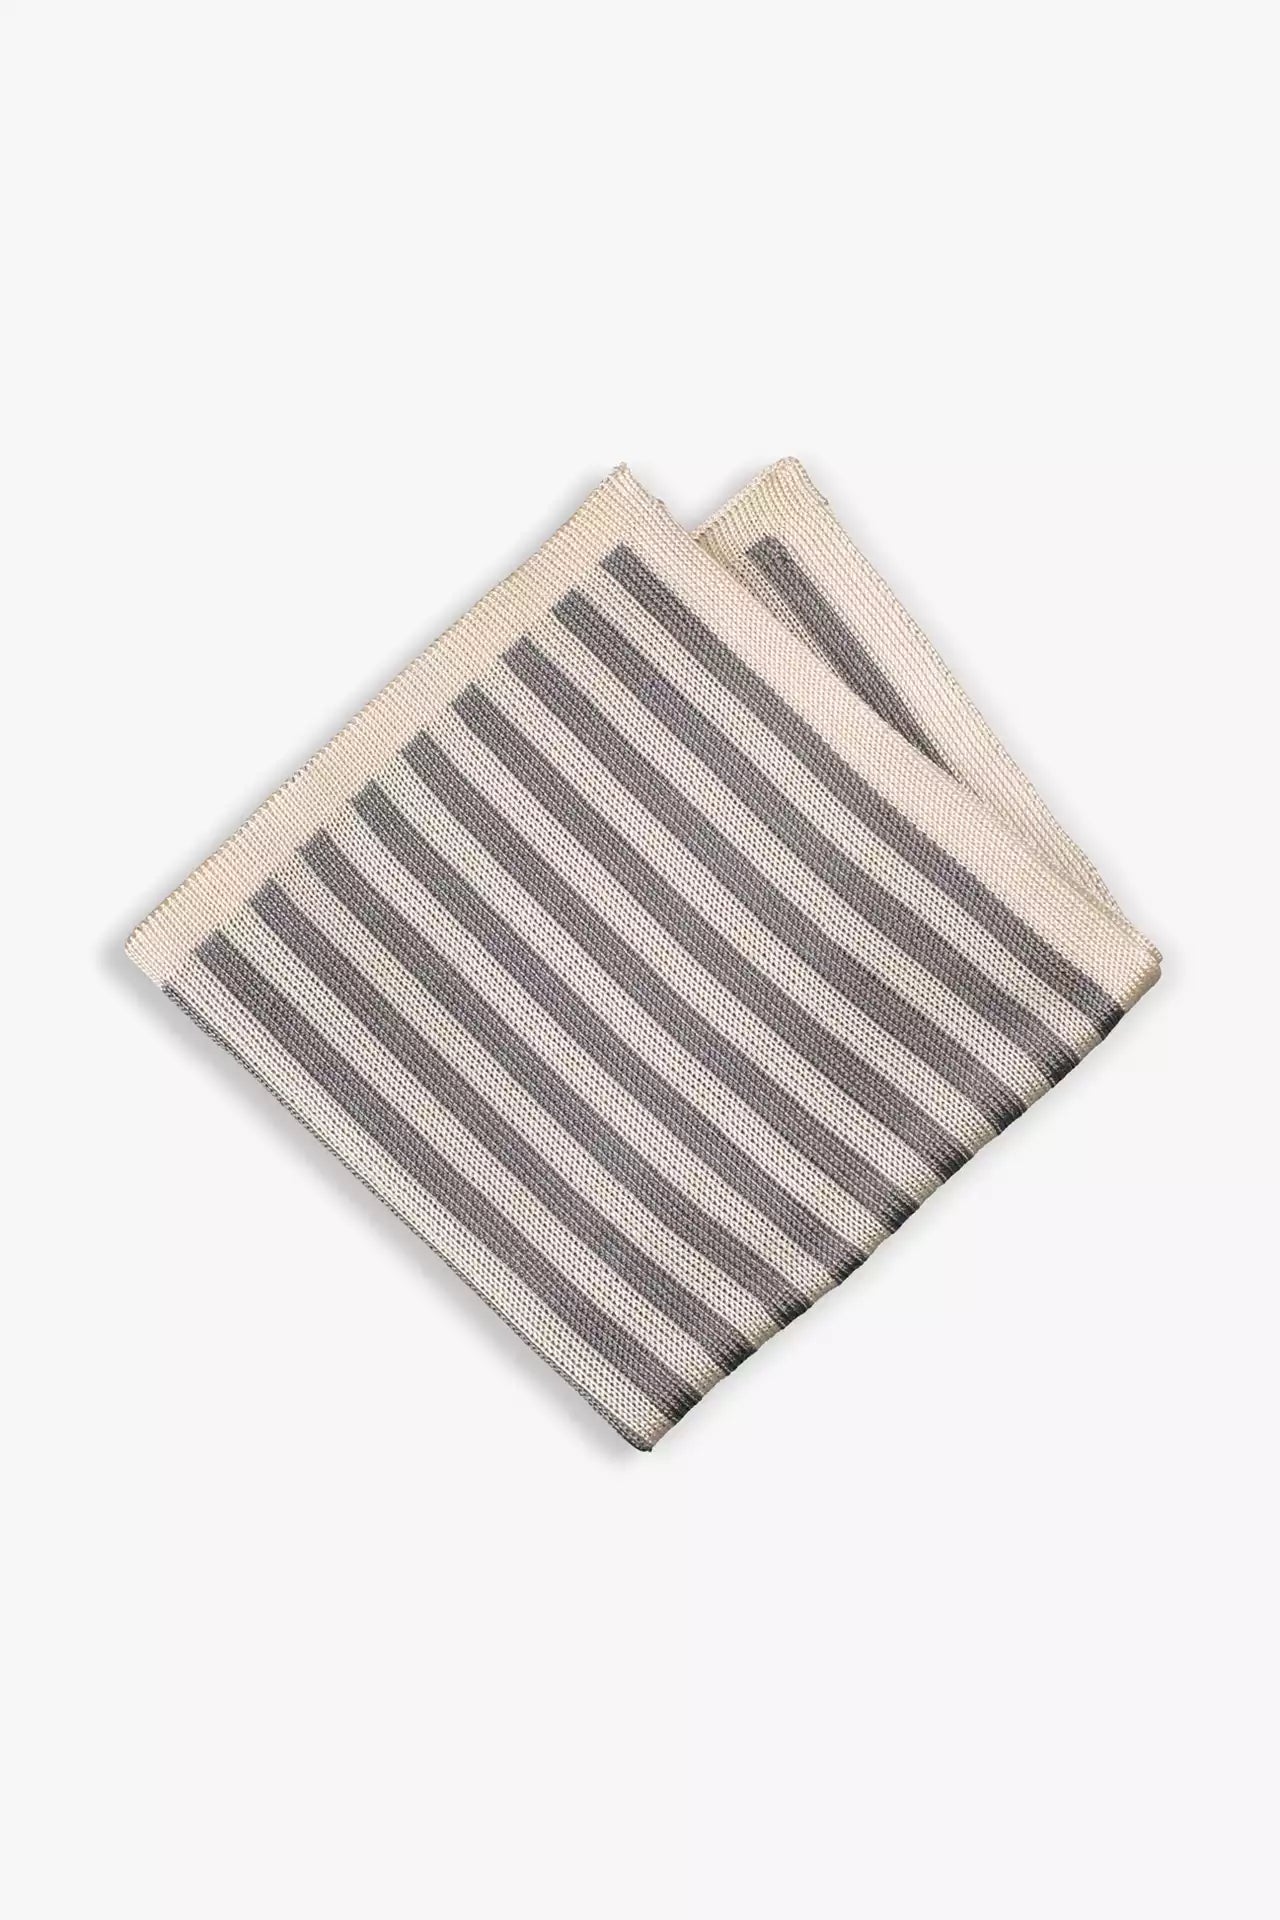 Gray and white striped knitted silk pocket square. Made in Italy paired with Matching tie.